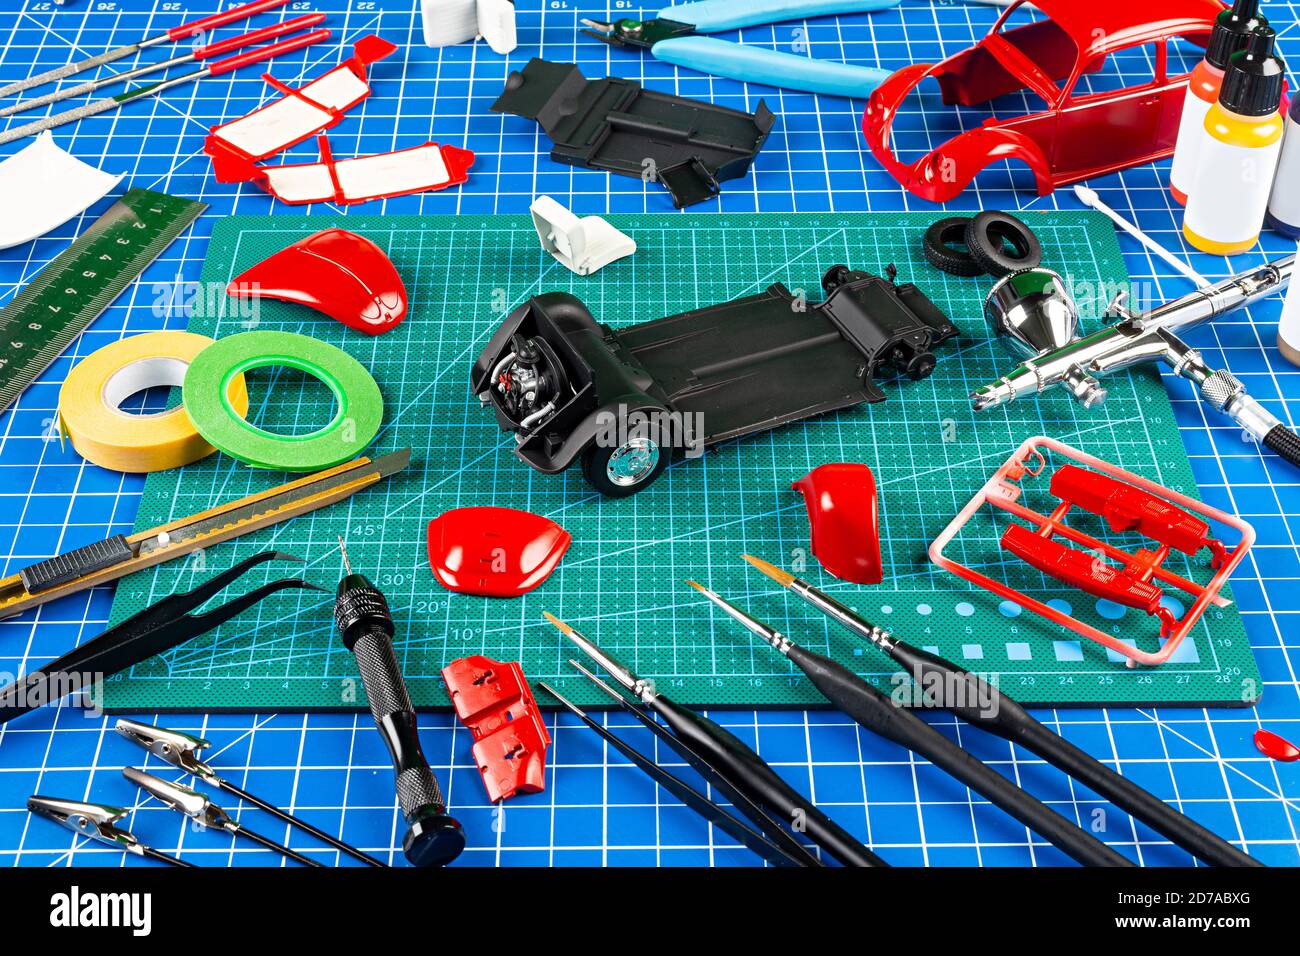 Plastic model kit and tools, hobby workplace background top view. Stock  Photo